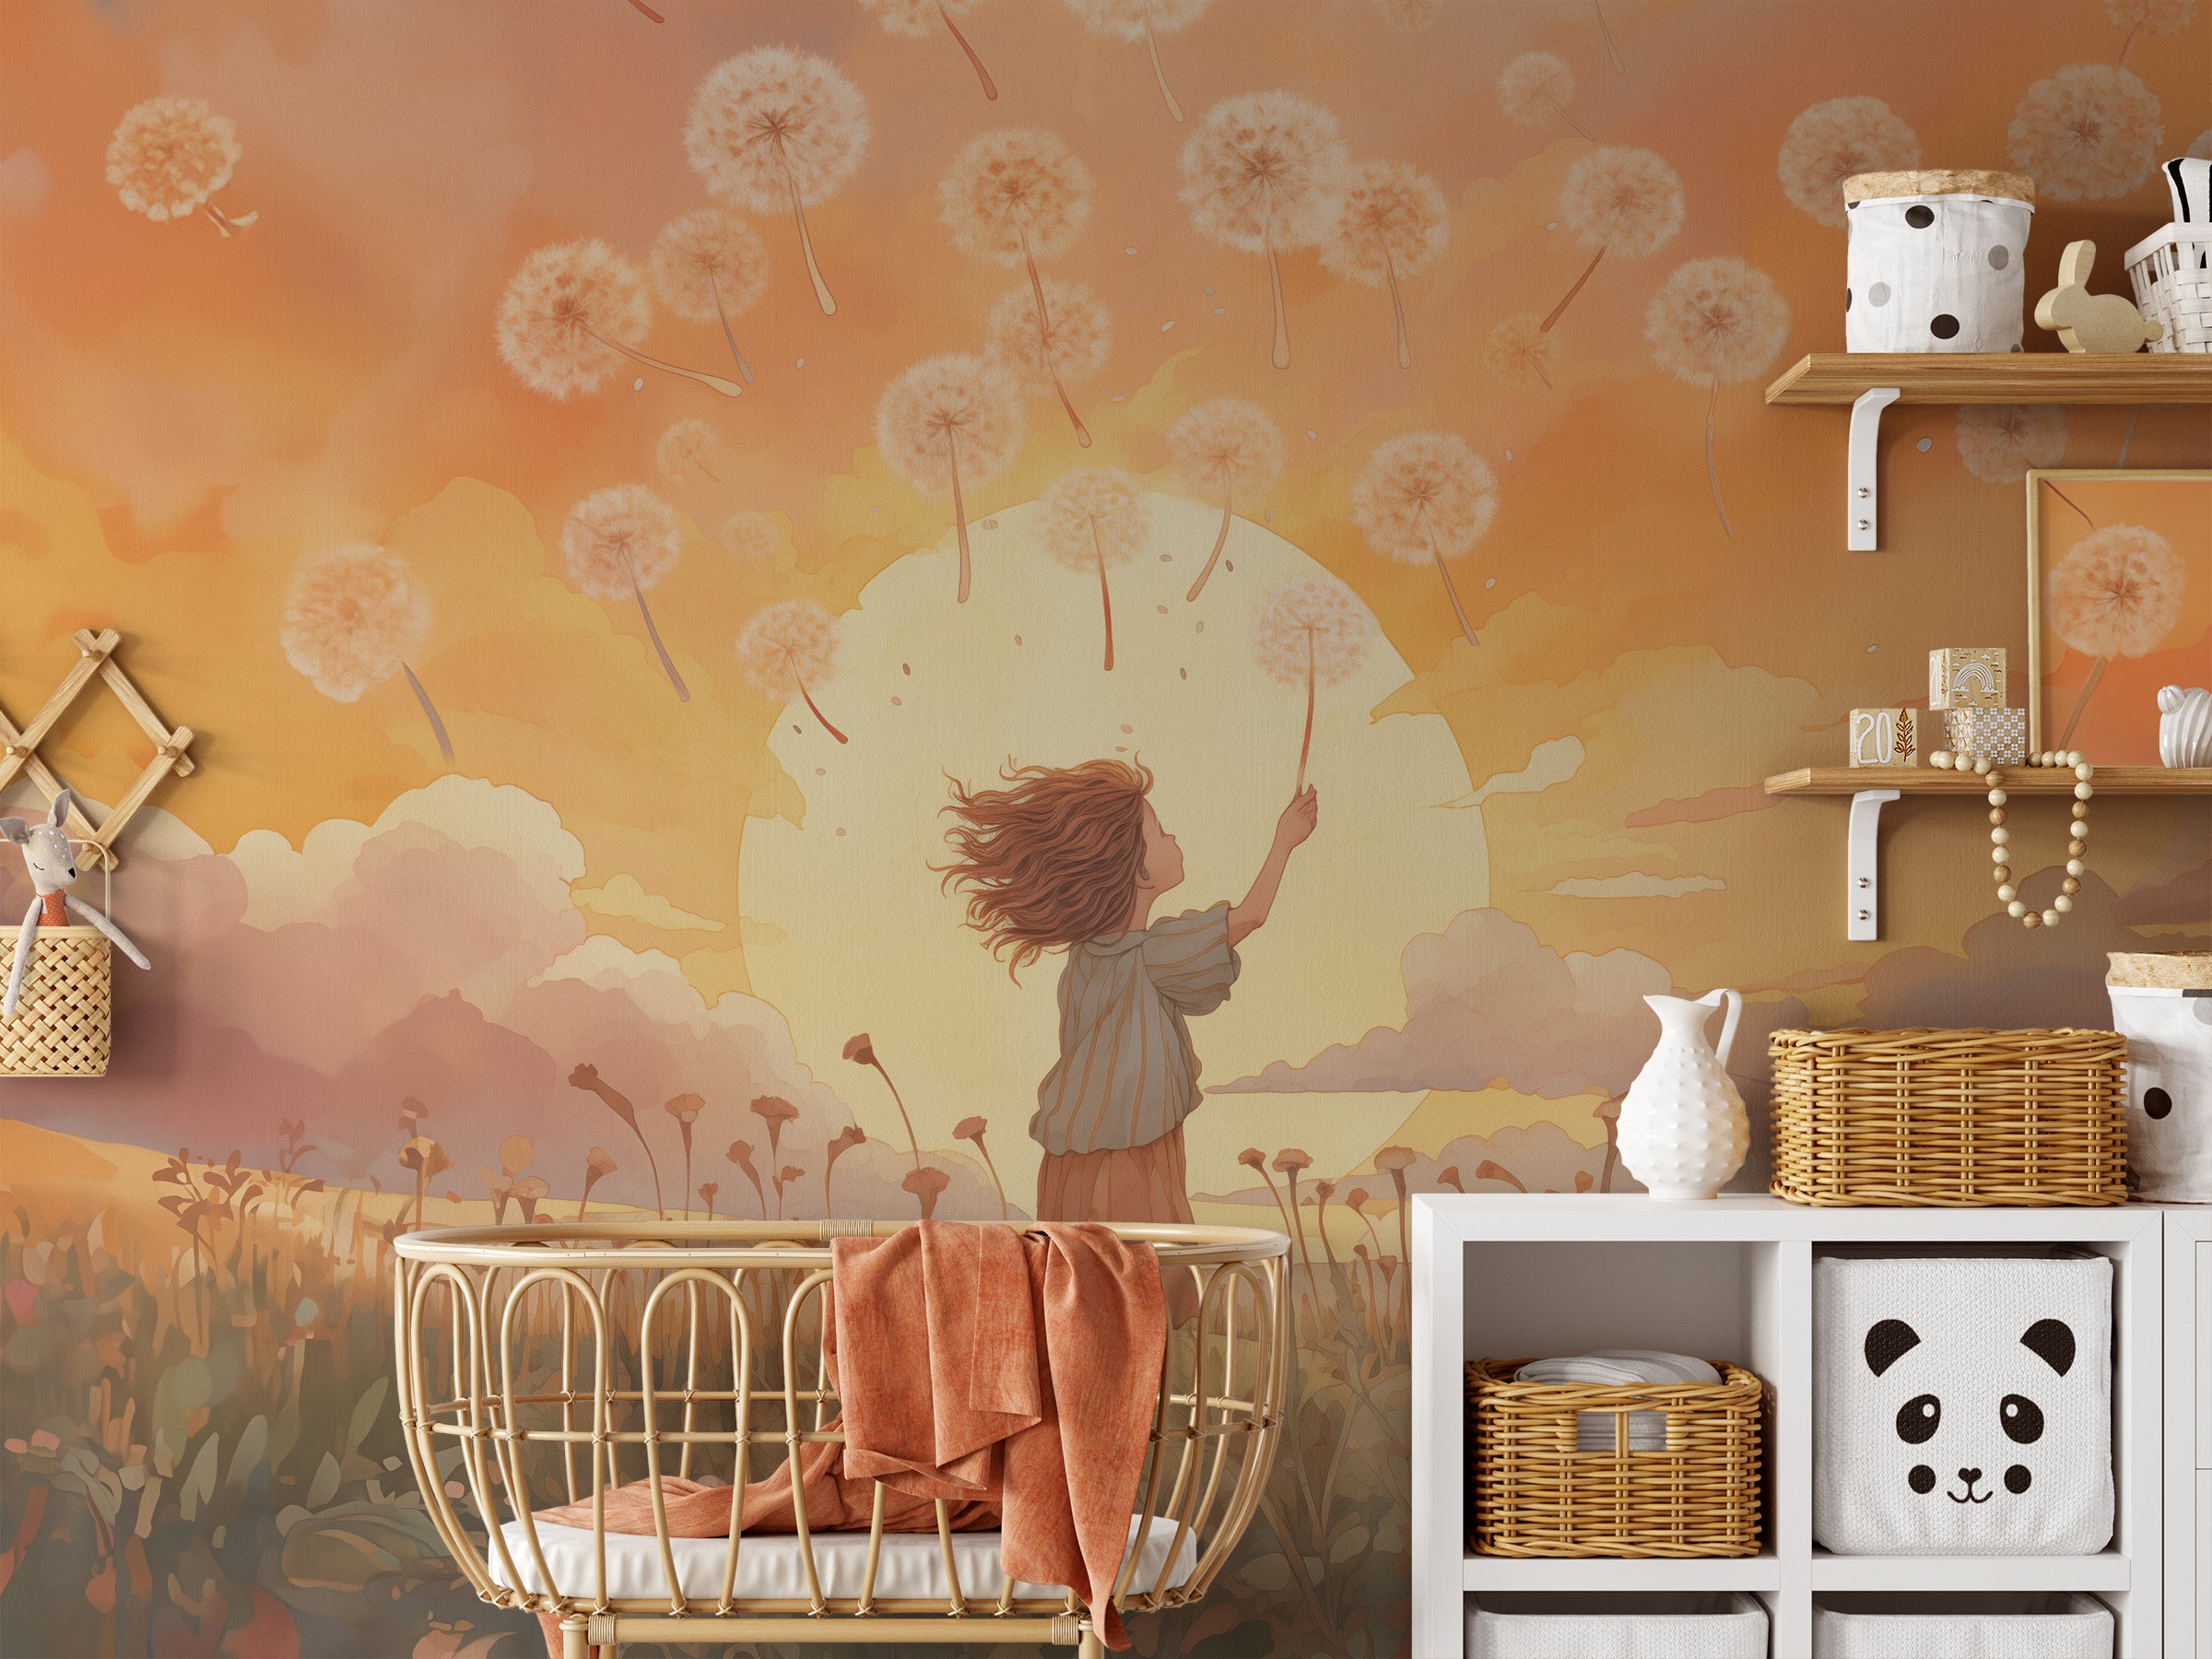 "Full view of the 'Make a Wish Mural' featuring a child reaching towards floating dandelion seeds against a vivid sunset."